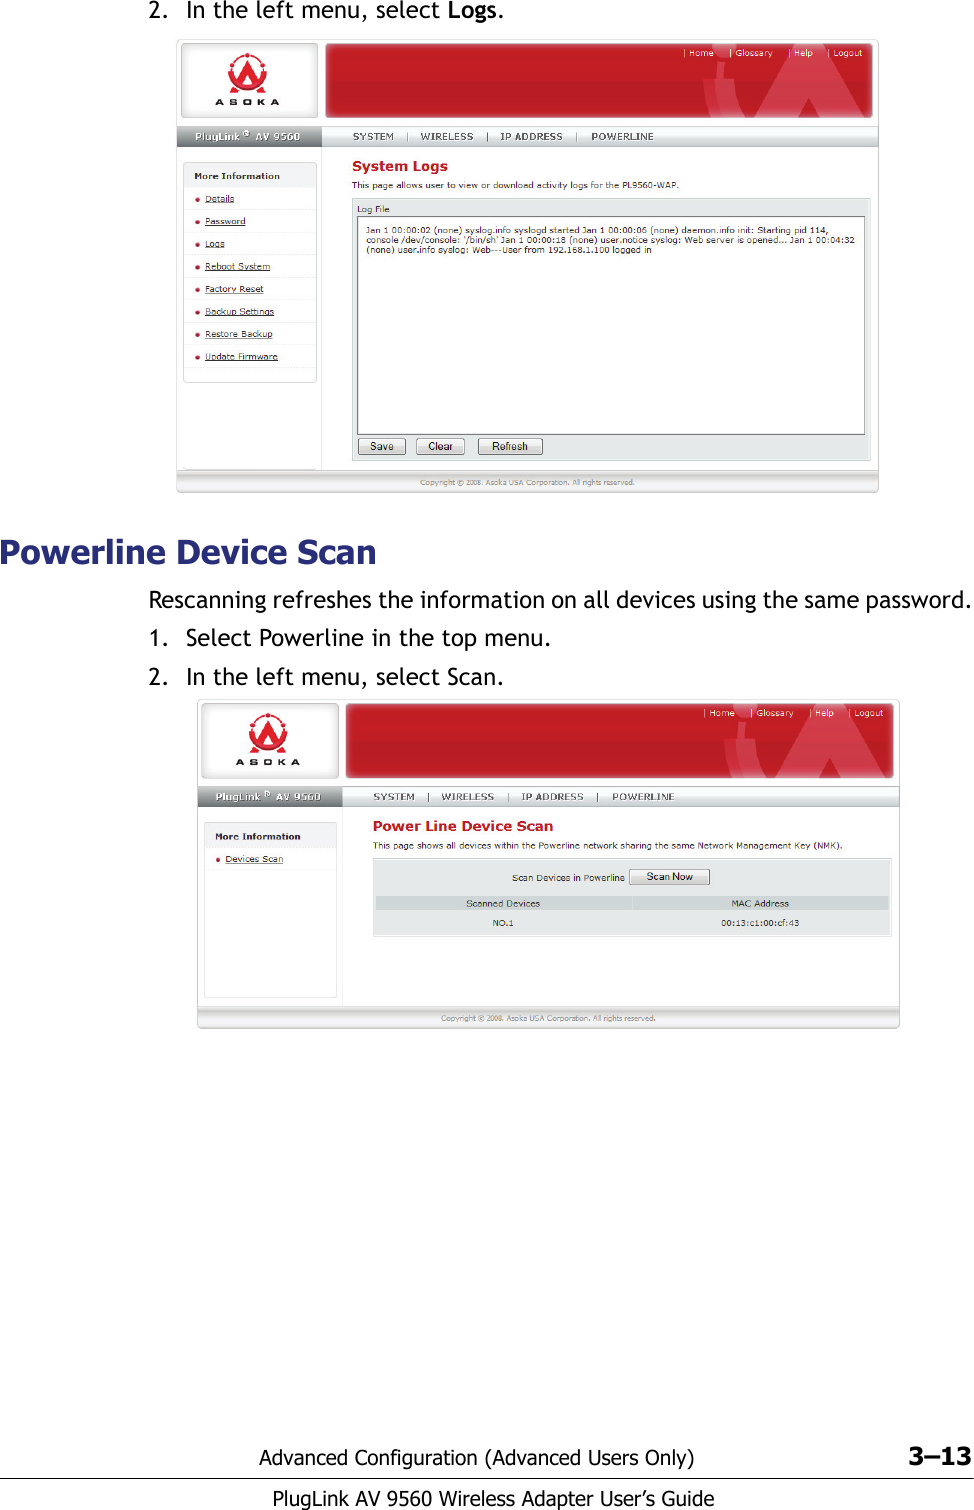 Advanced Configuration (Advanced Users Only) 3–13PlugLink AV 9560 Wireless Adapter User’s Guide2. In the left menu, select Logs.Powerline Device ScanRescanning refreshes the information on all devices using the same password.1. Select Powerline in the top menu.2. In the left menu, select Scan.